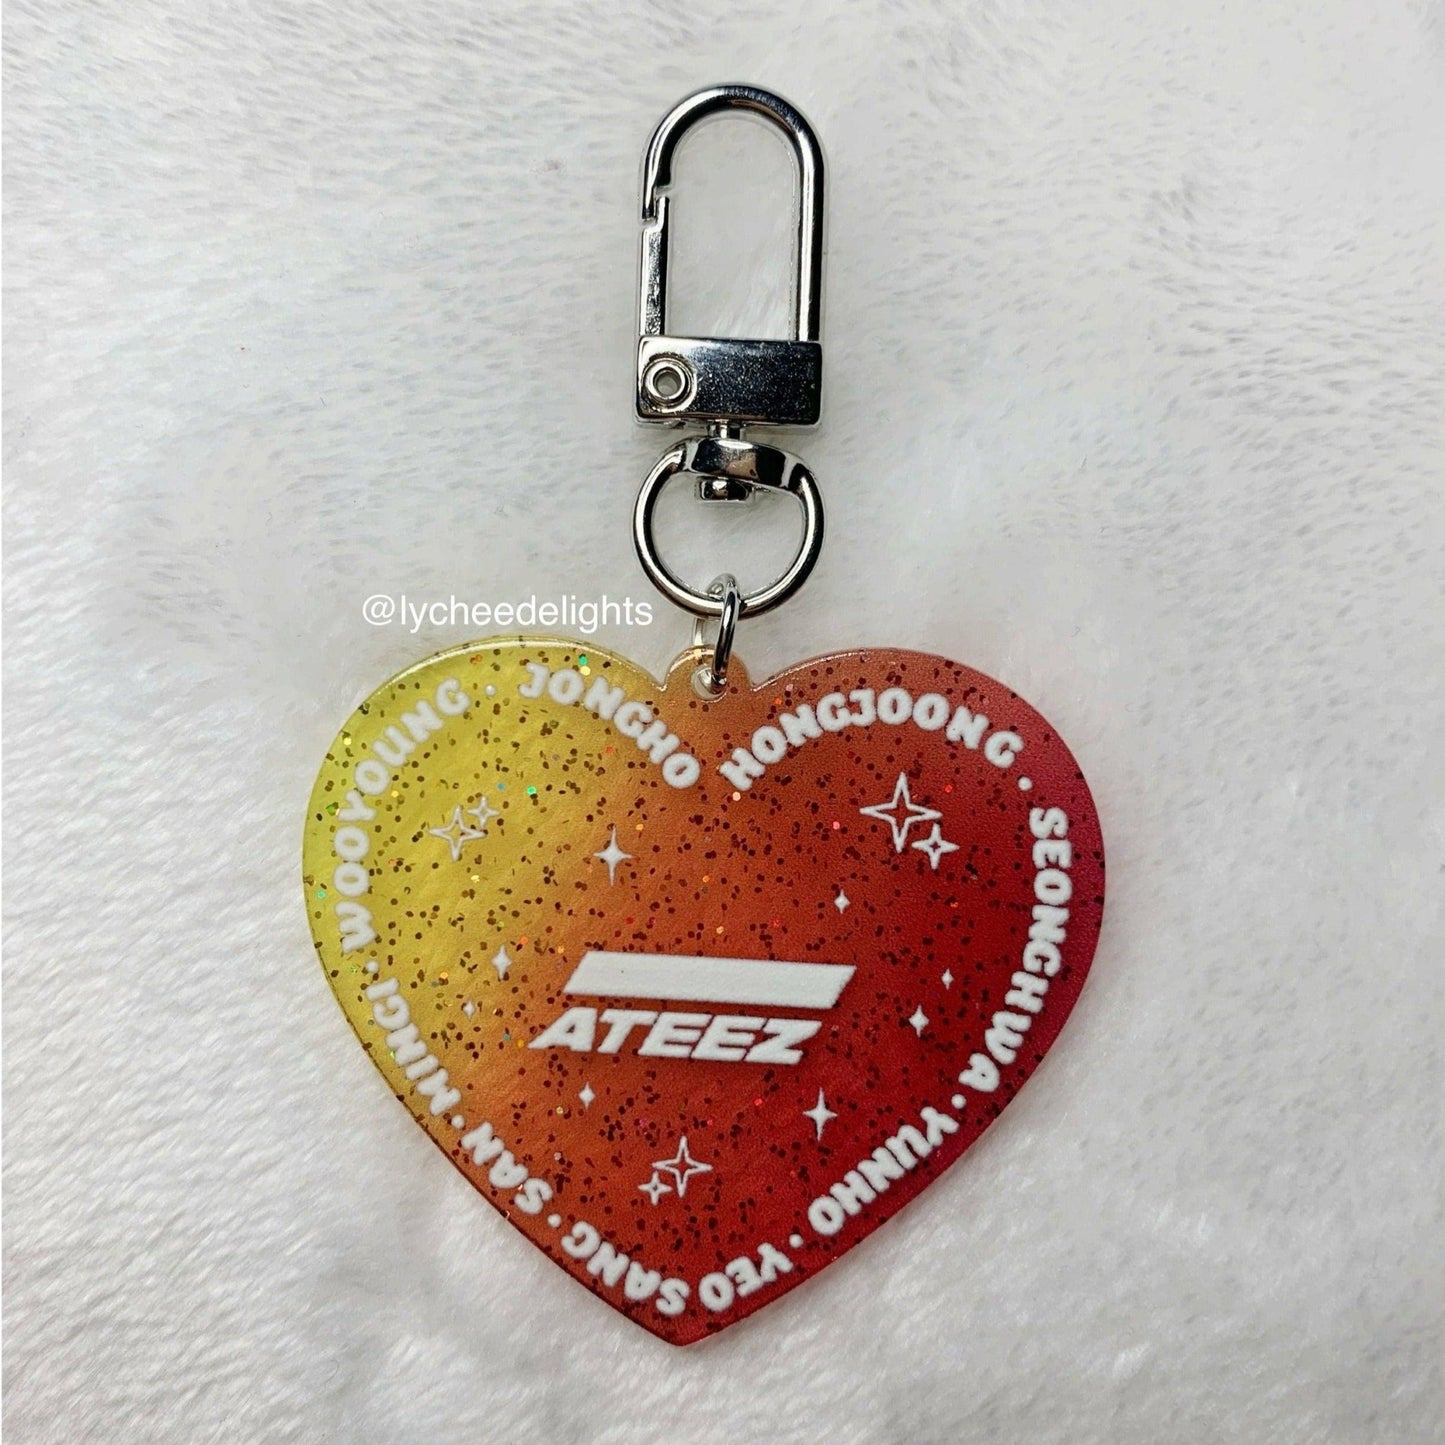 ATEEZ Heart Keychain - MilkBunn Co. Front detail of keychain. Red to yellow ombre, glitter acrylic.